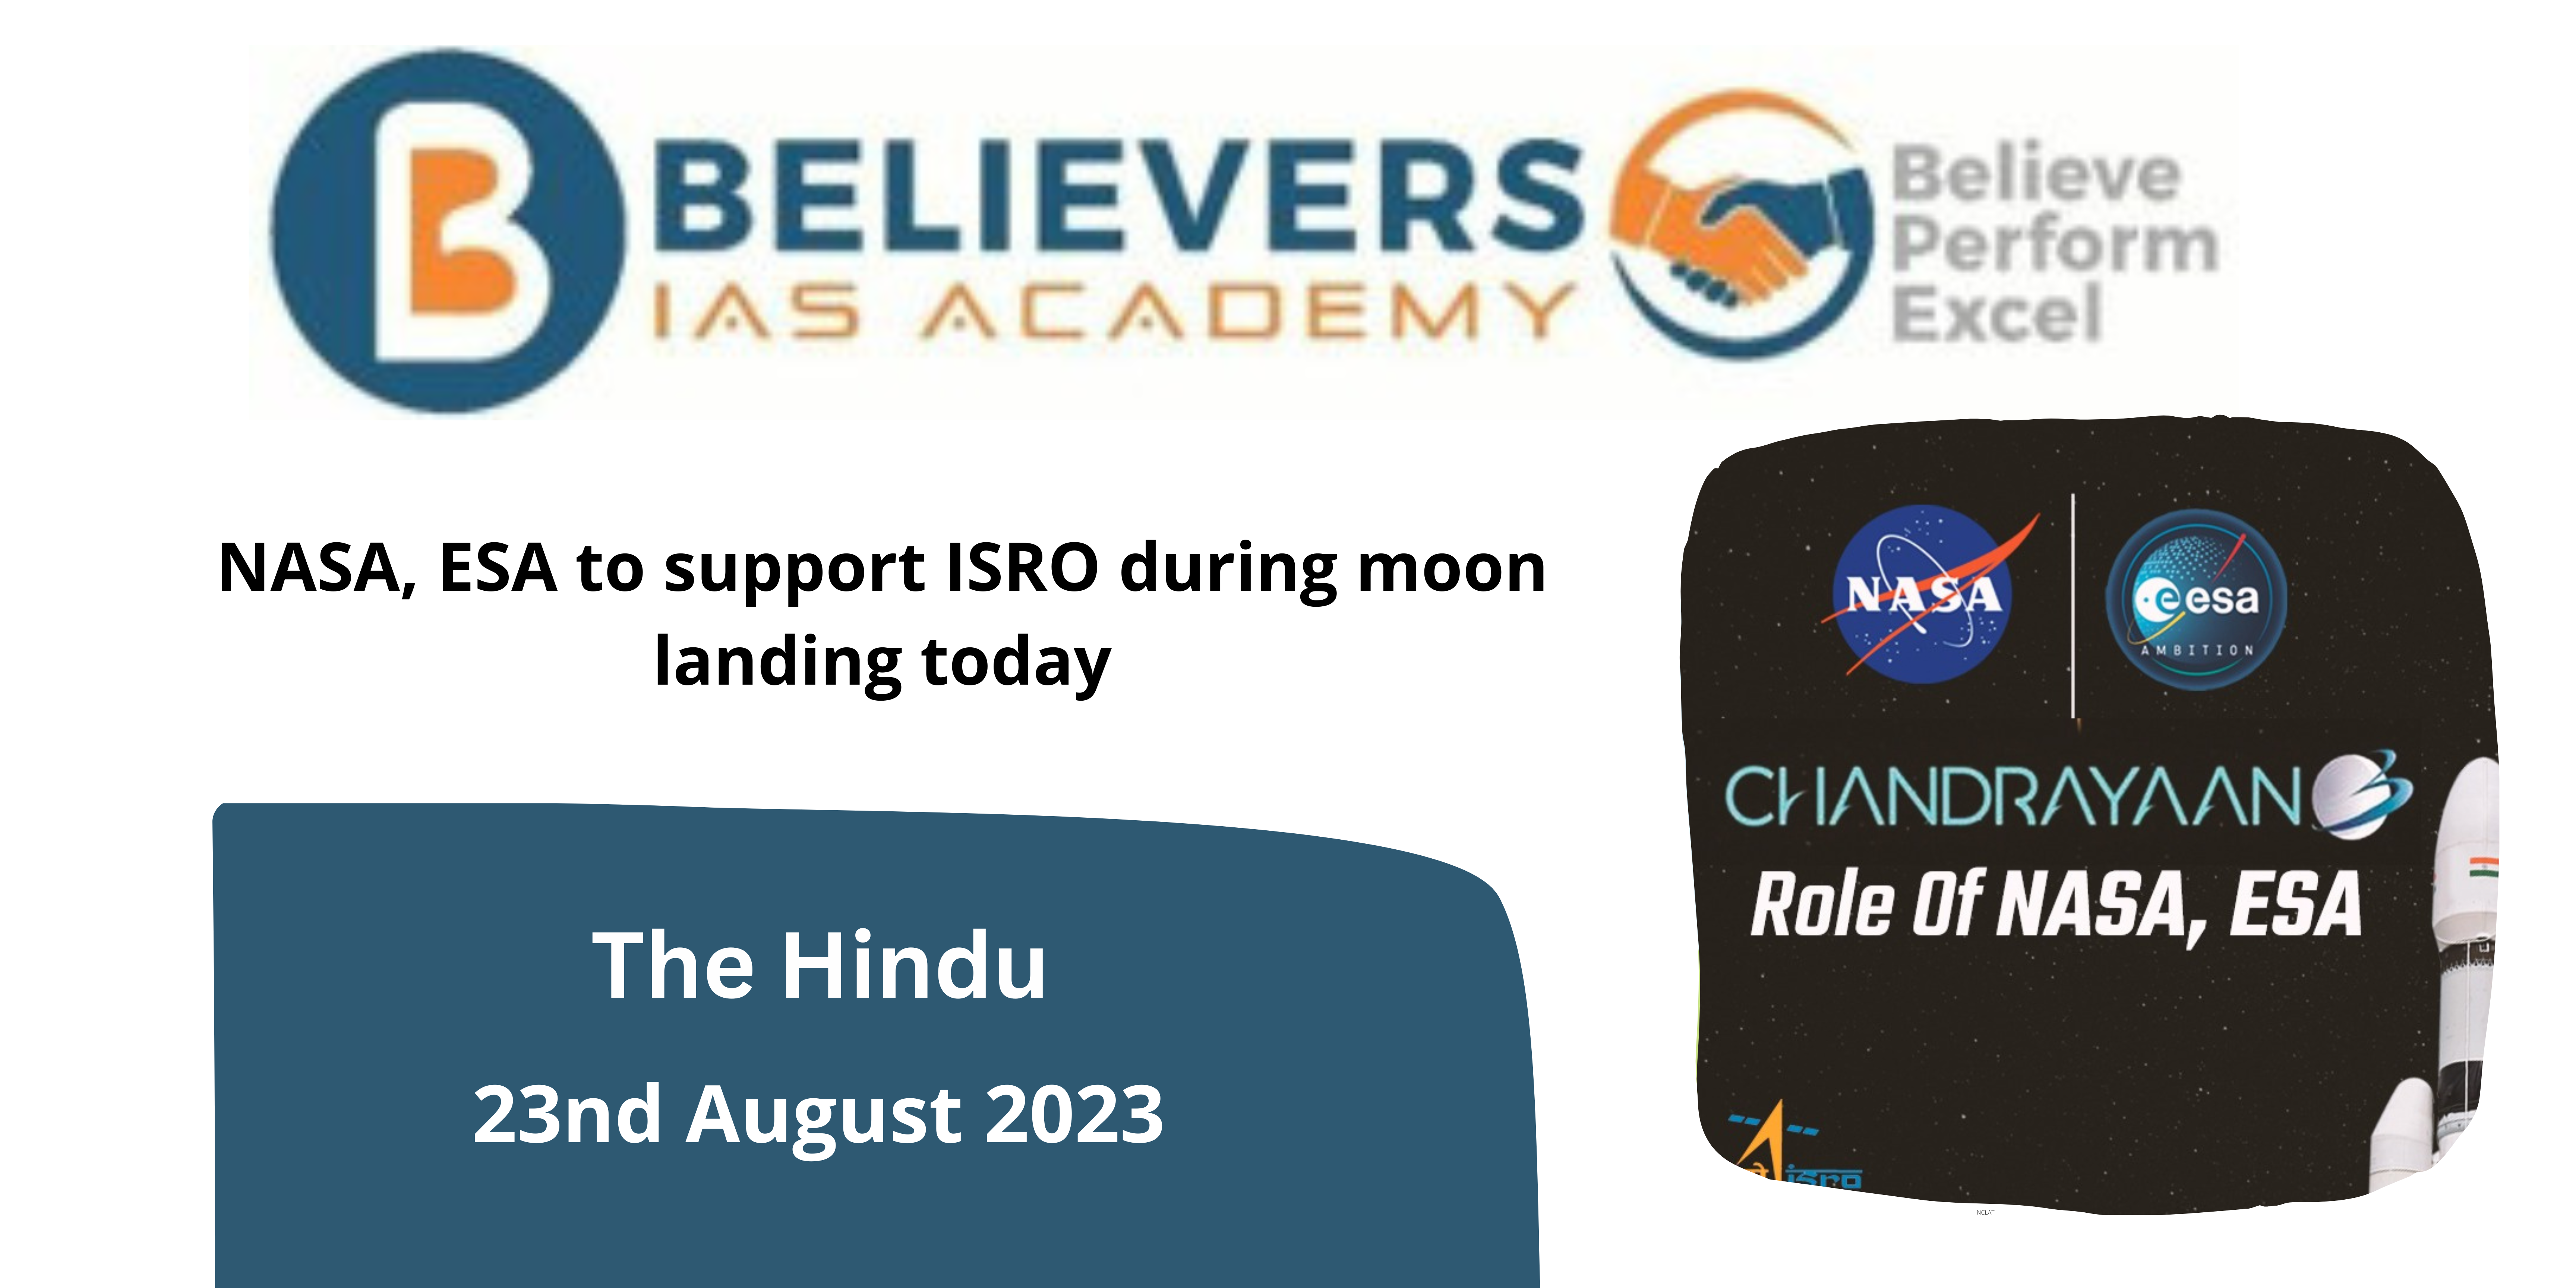 NASA, ESA to support ISRO during moon landing today